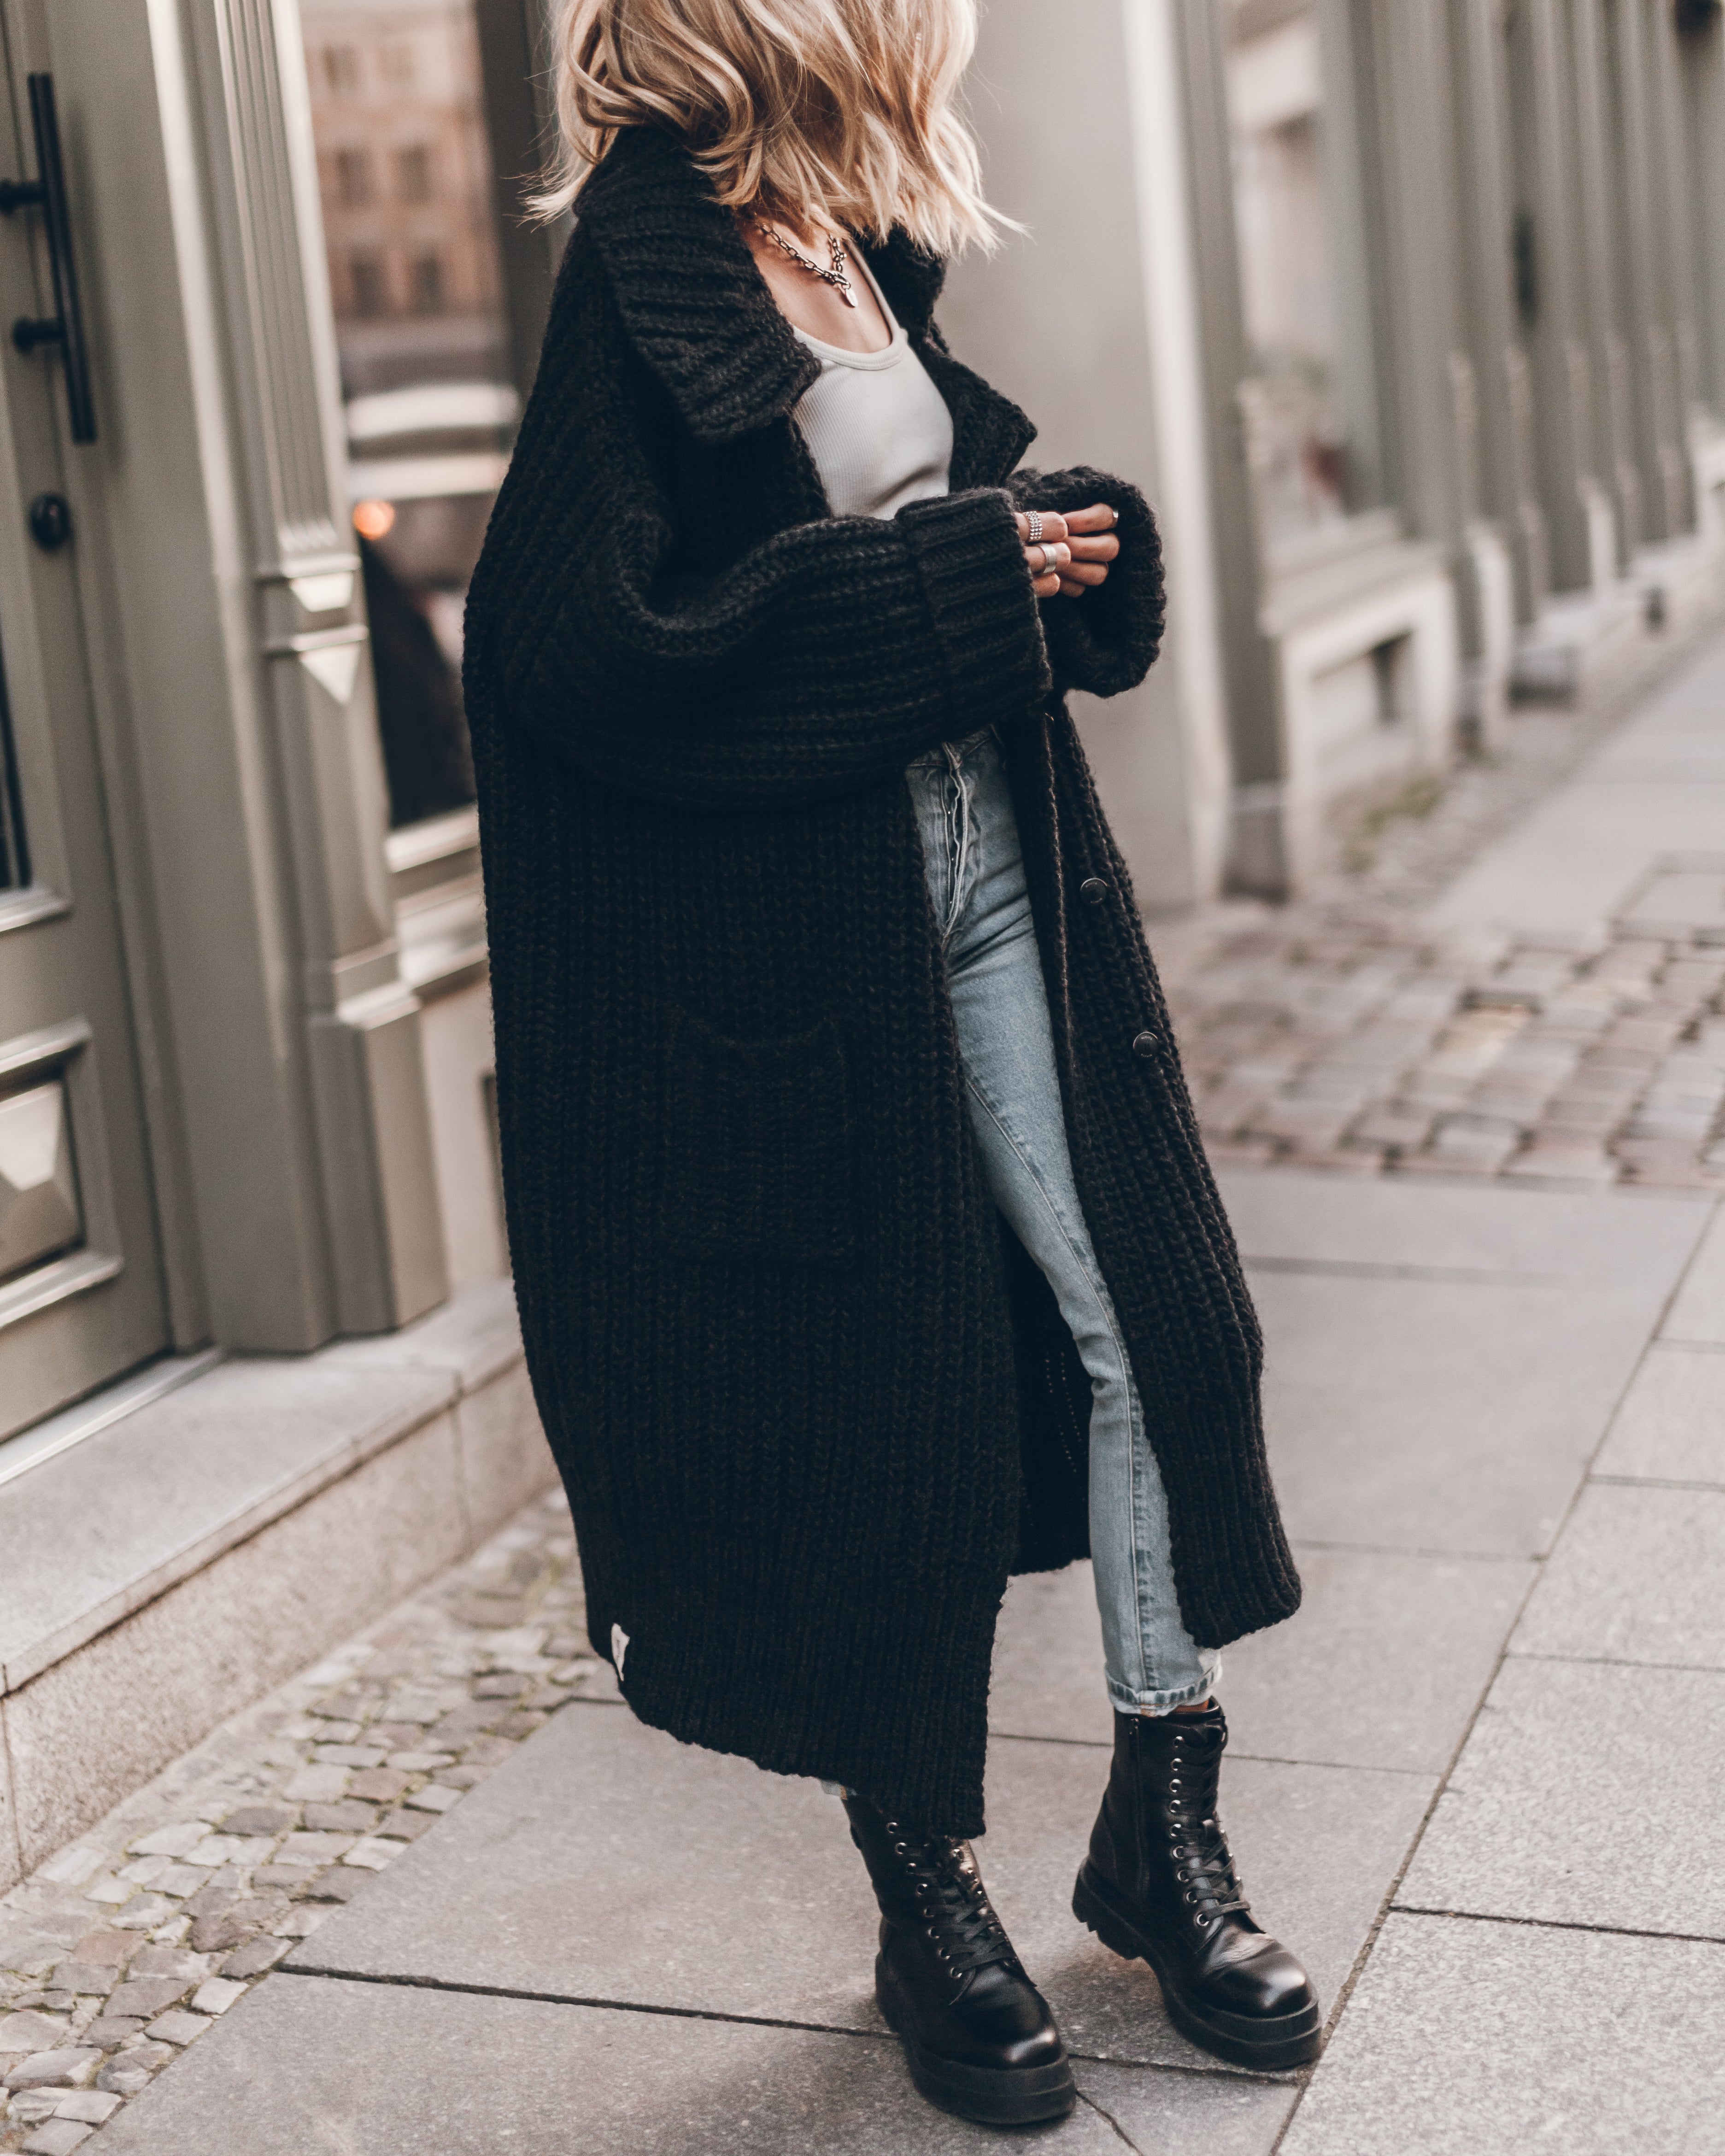 The Dark Long Knitted Cardigan